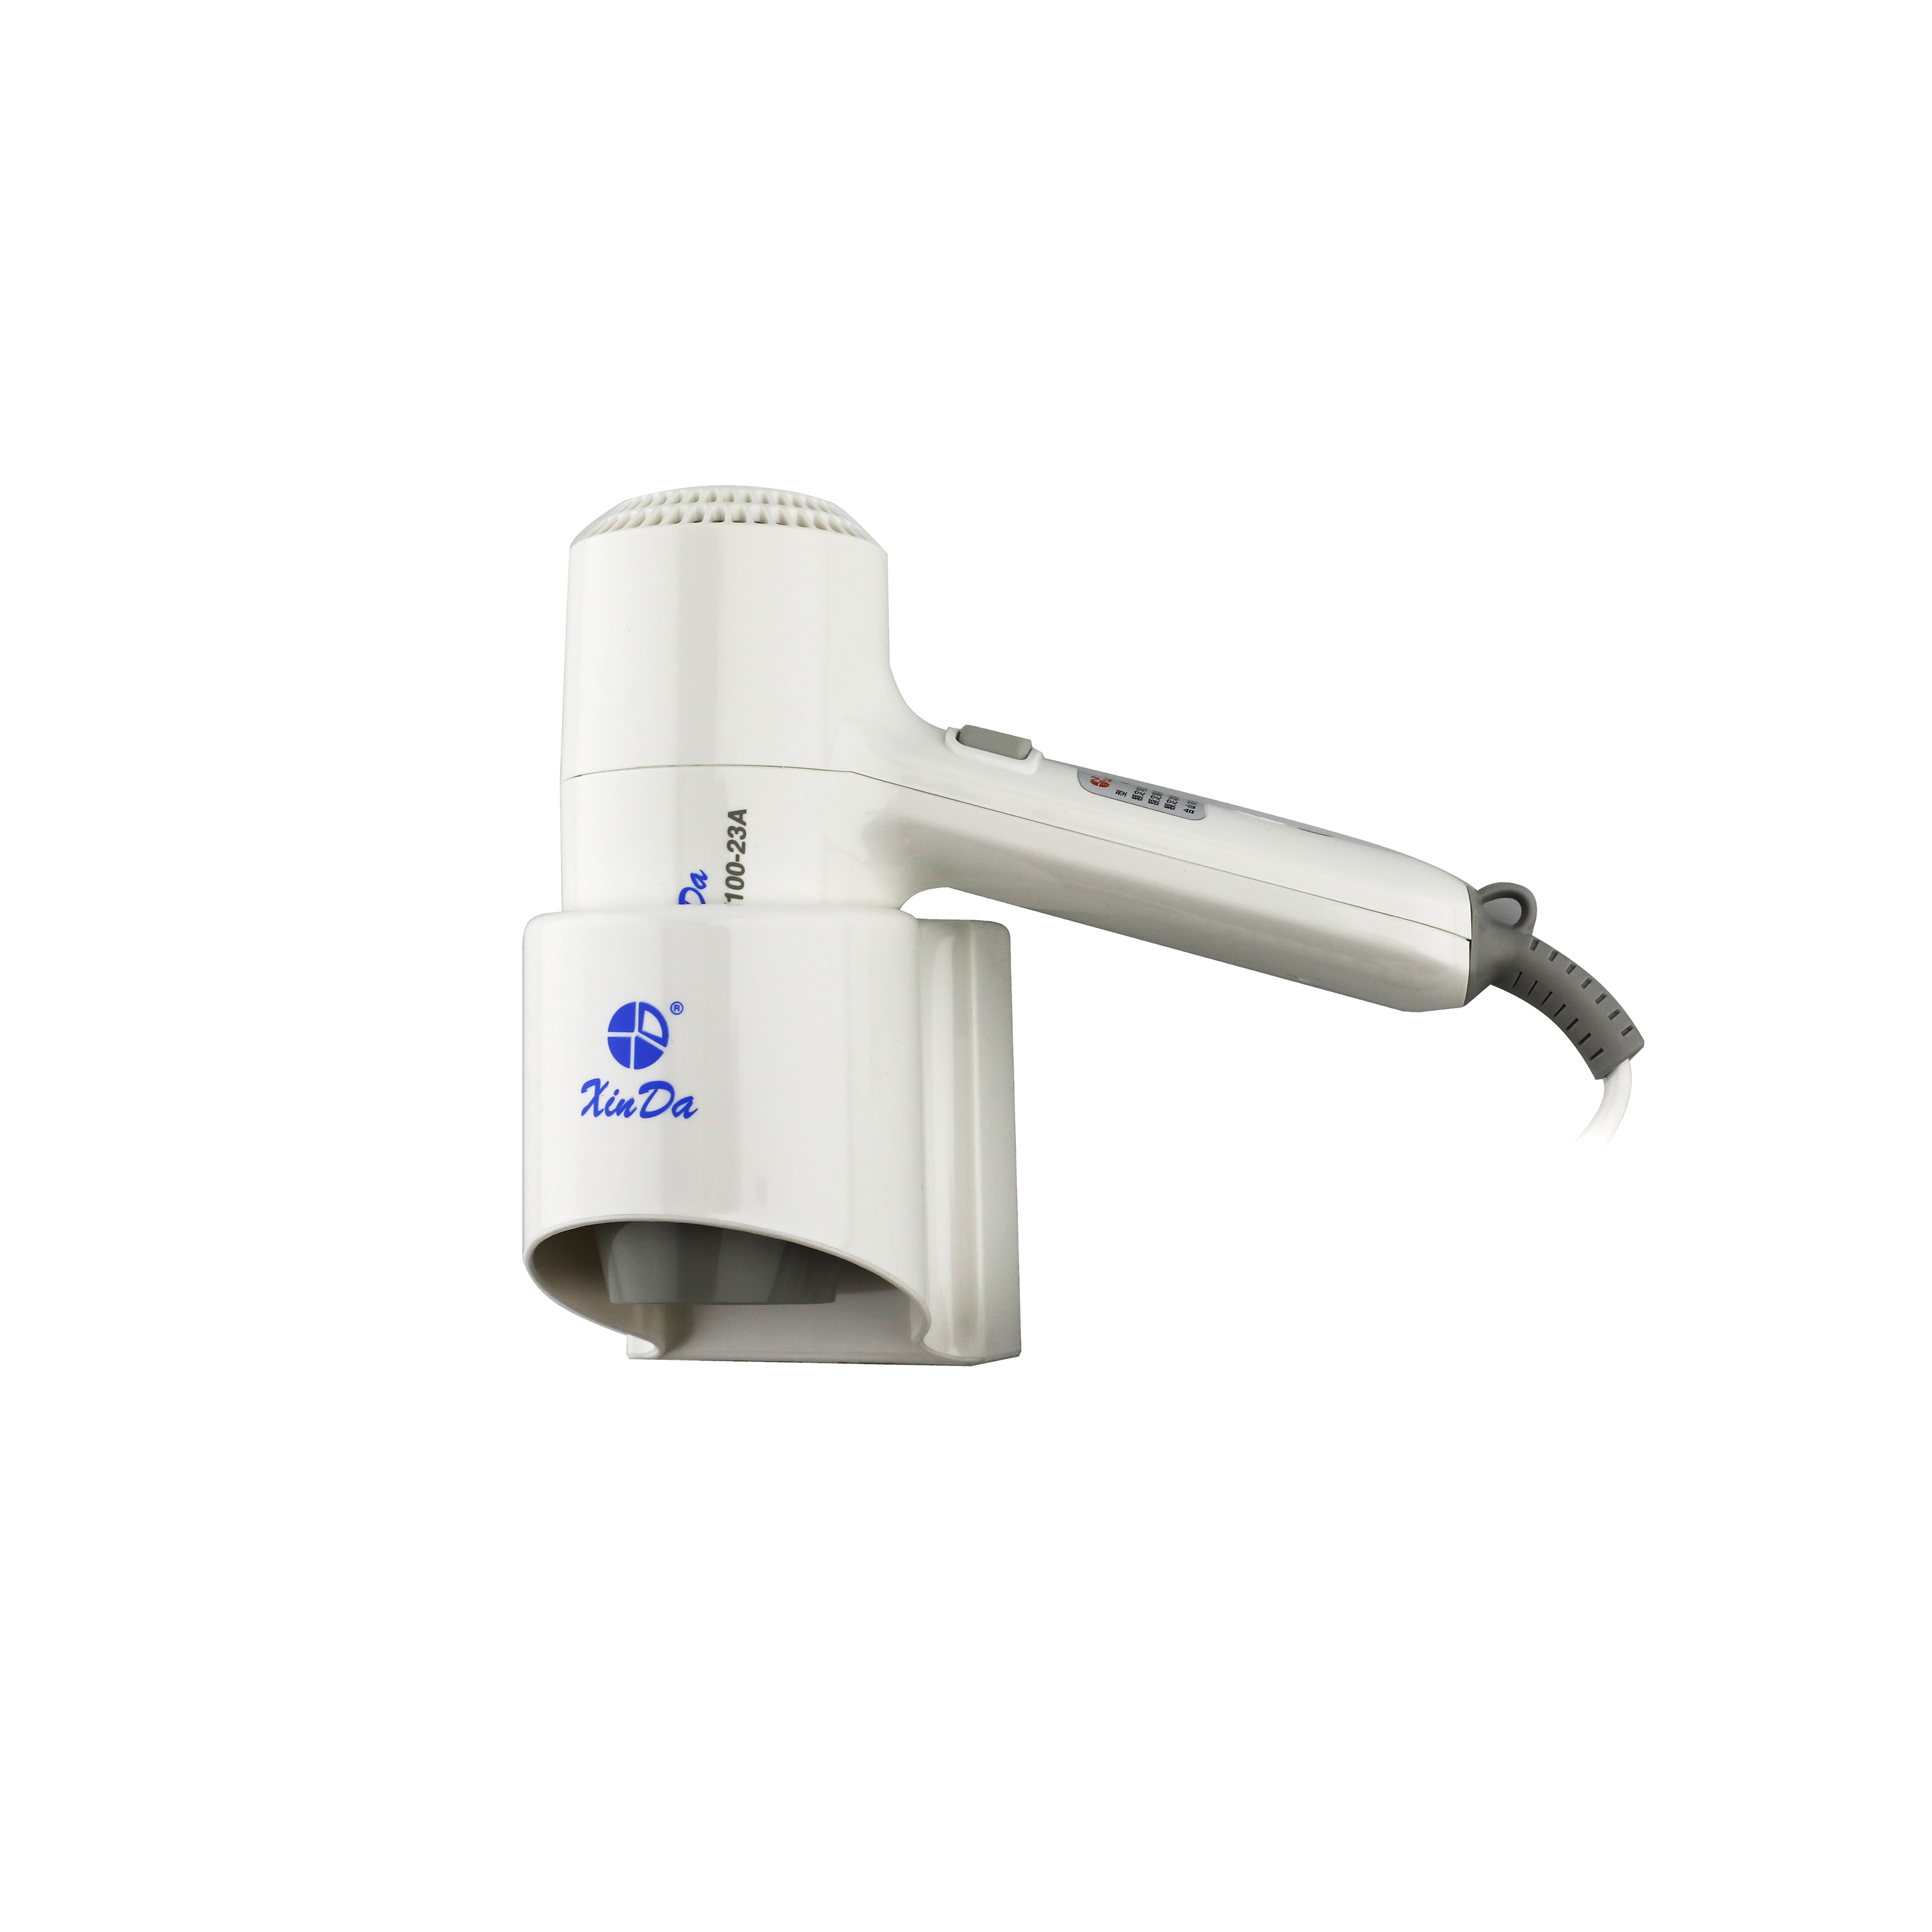 XINDA RCY-100 23A Best Wall Mount Hair Dryer